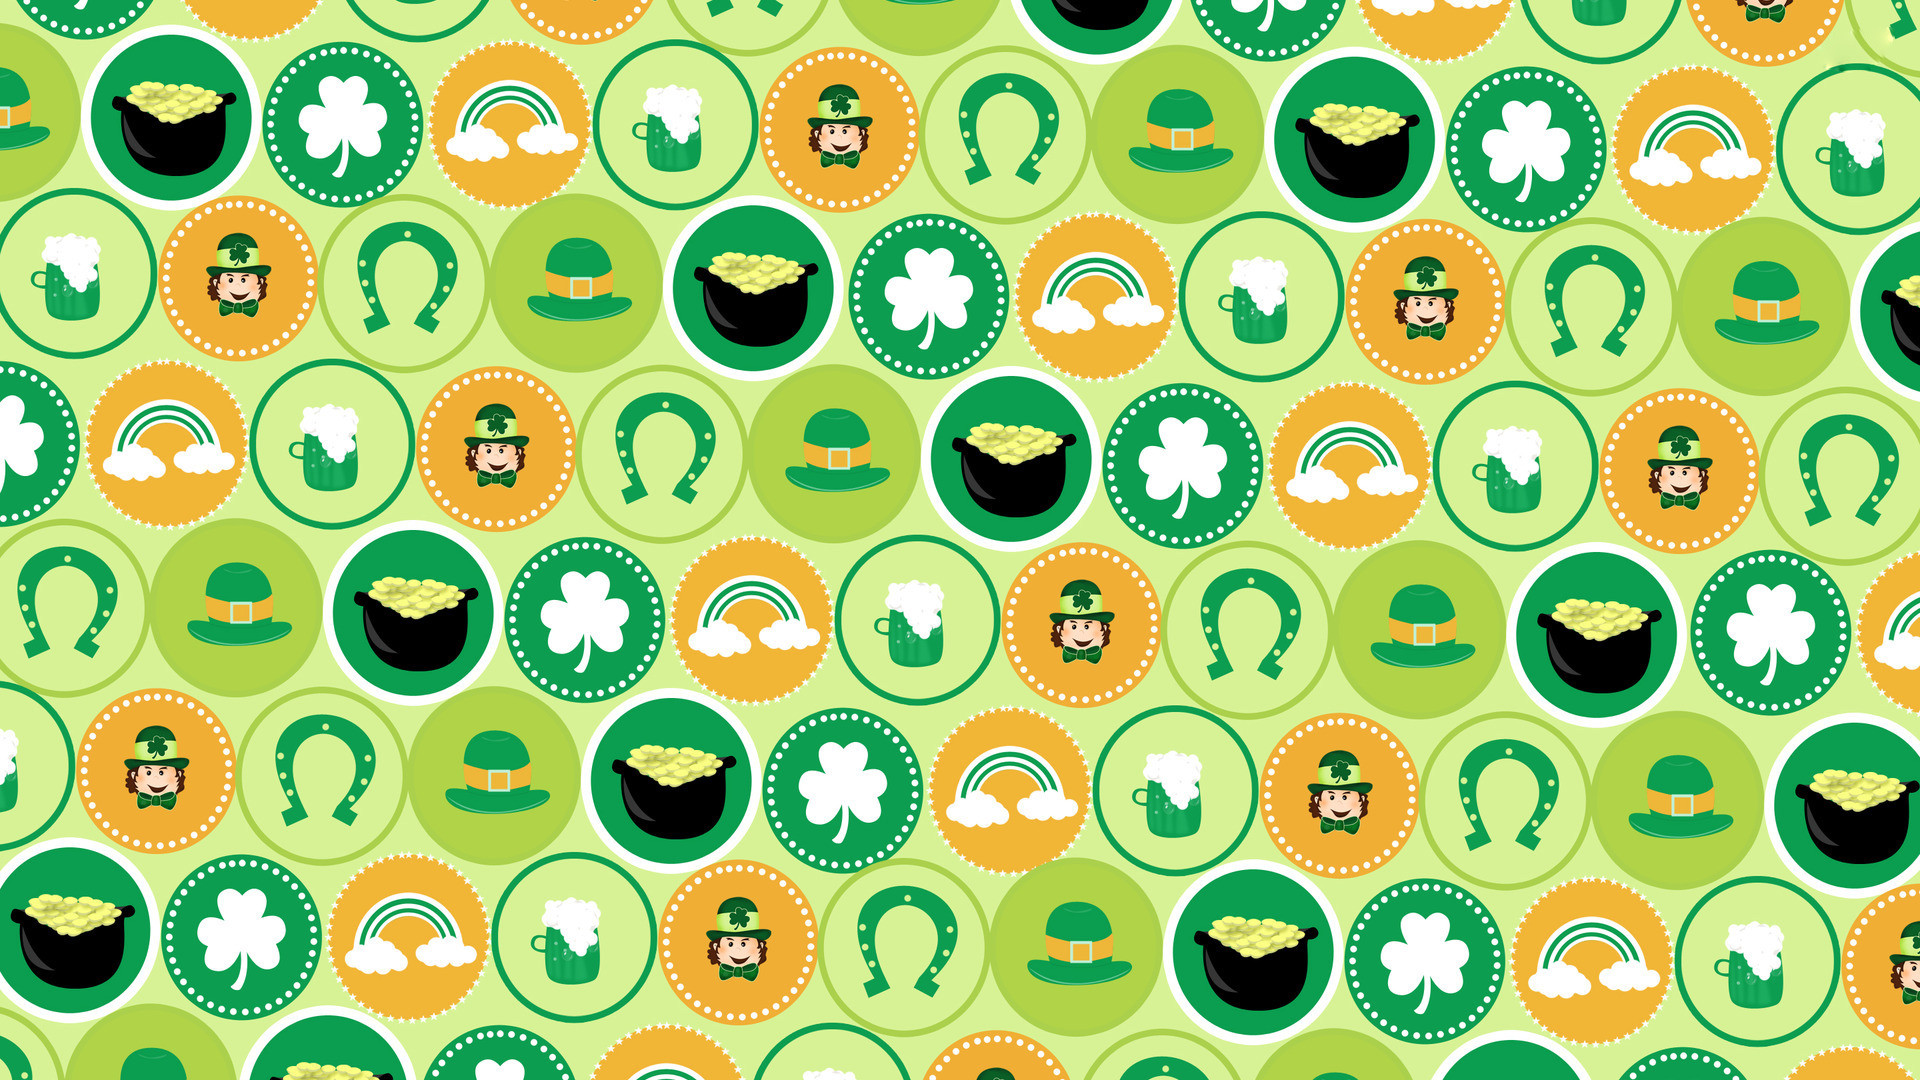 1920x1080 St Pattys Day Wallpapers Images Latest.